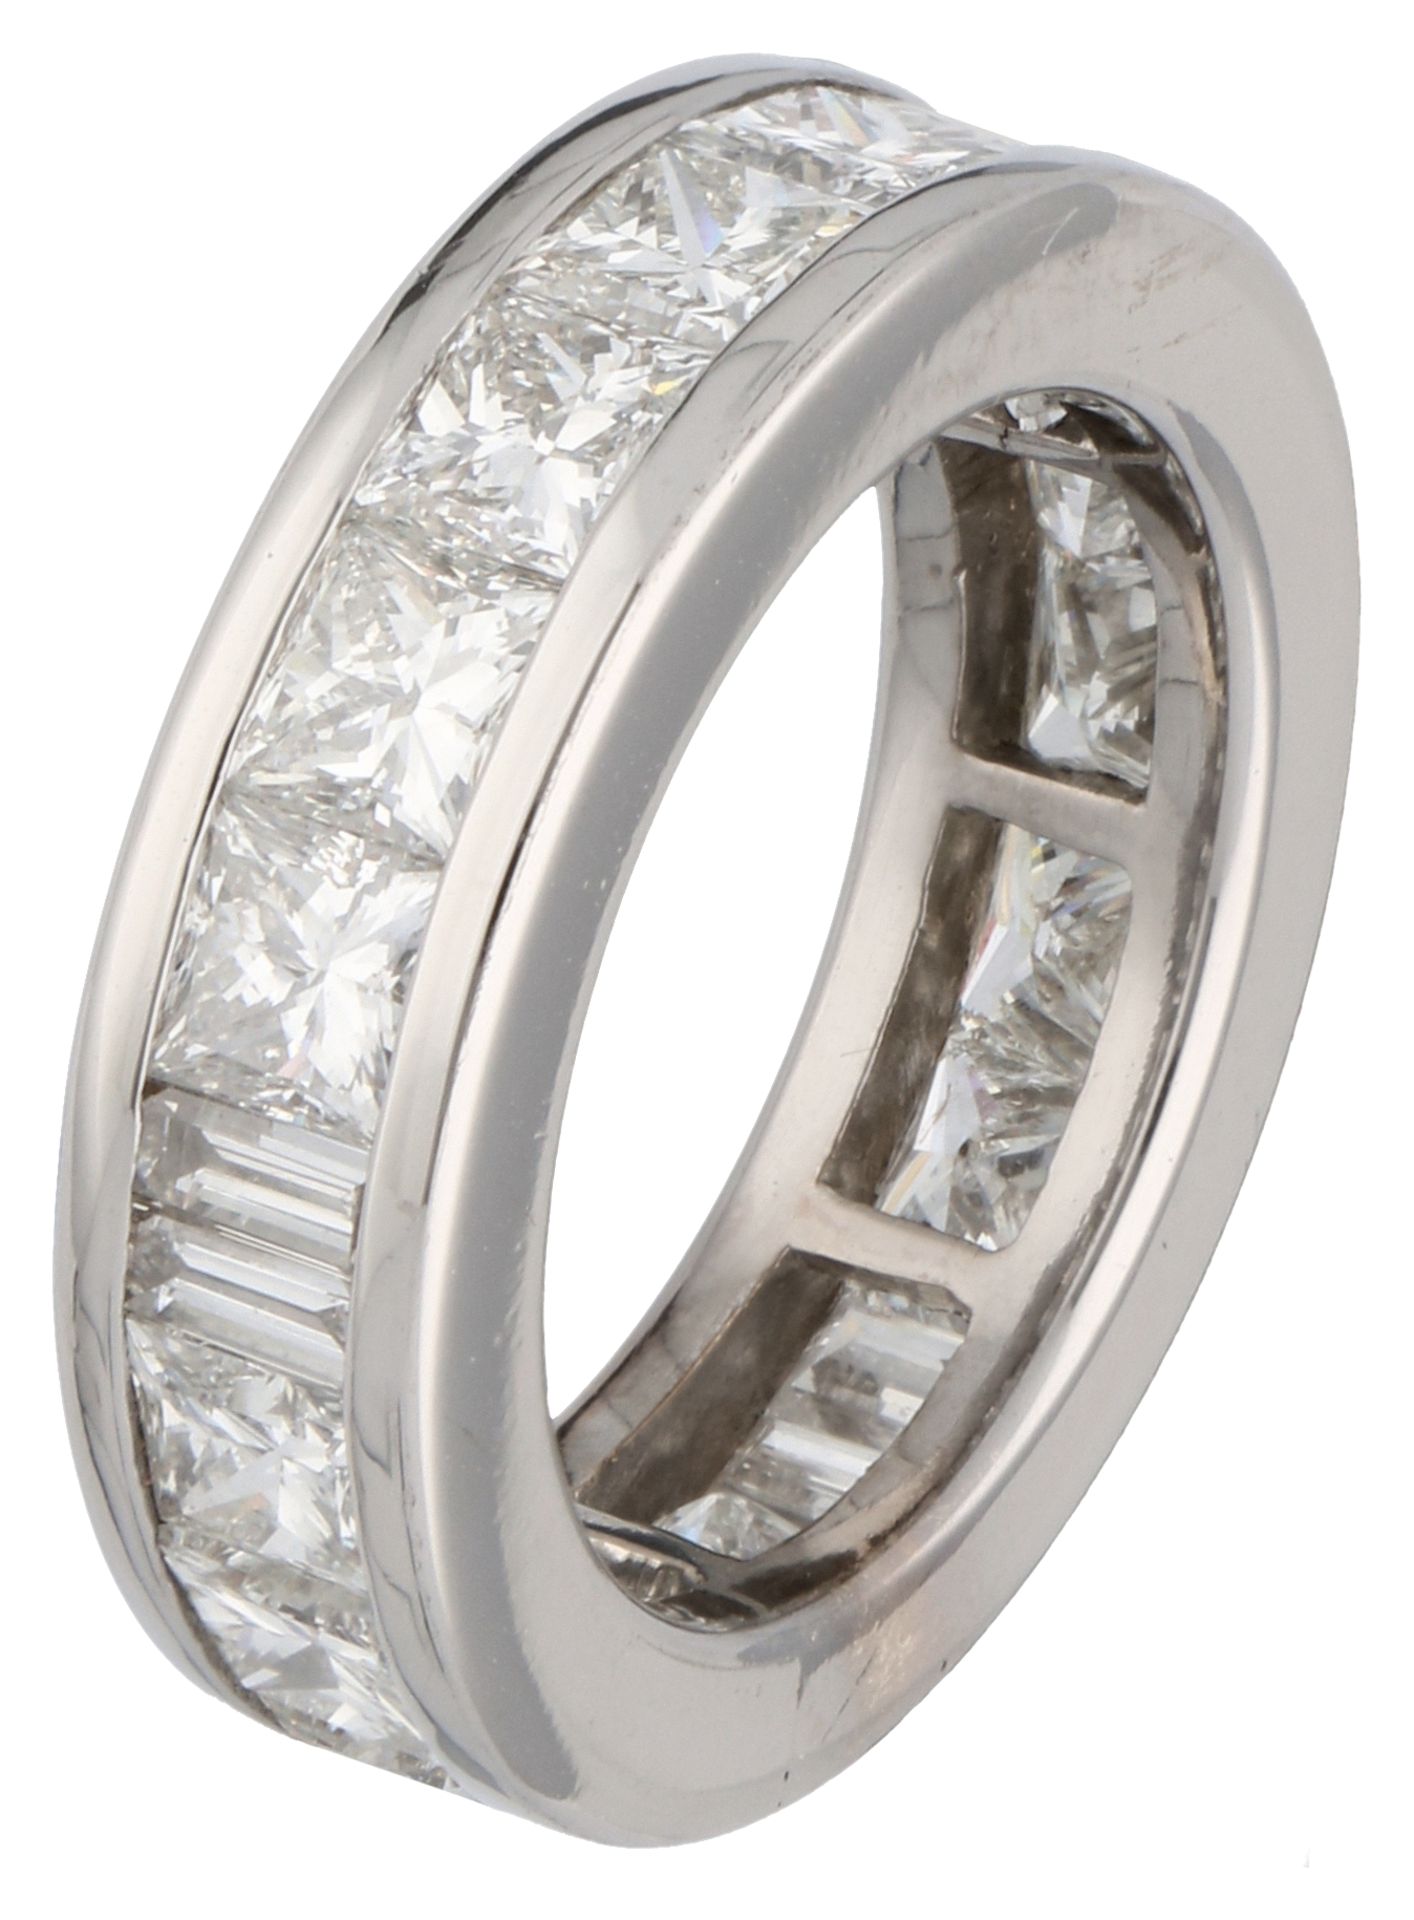 No Reserve - 18K White gold alliance ring set with approx. 3.6 ct. diamond.